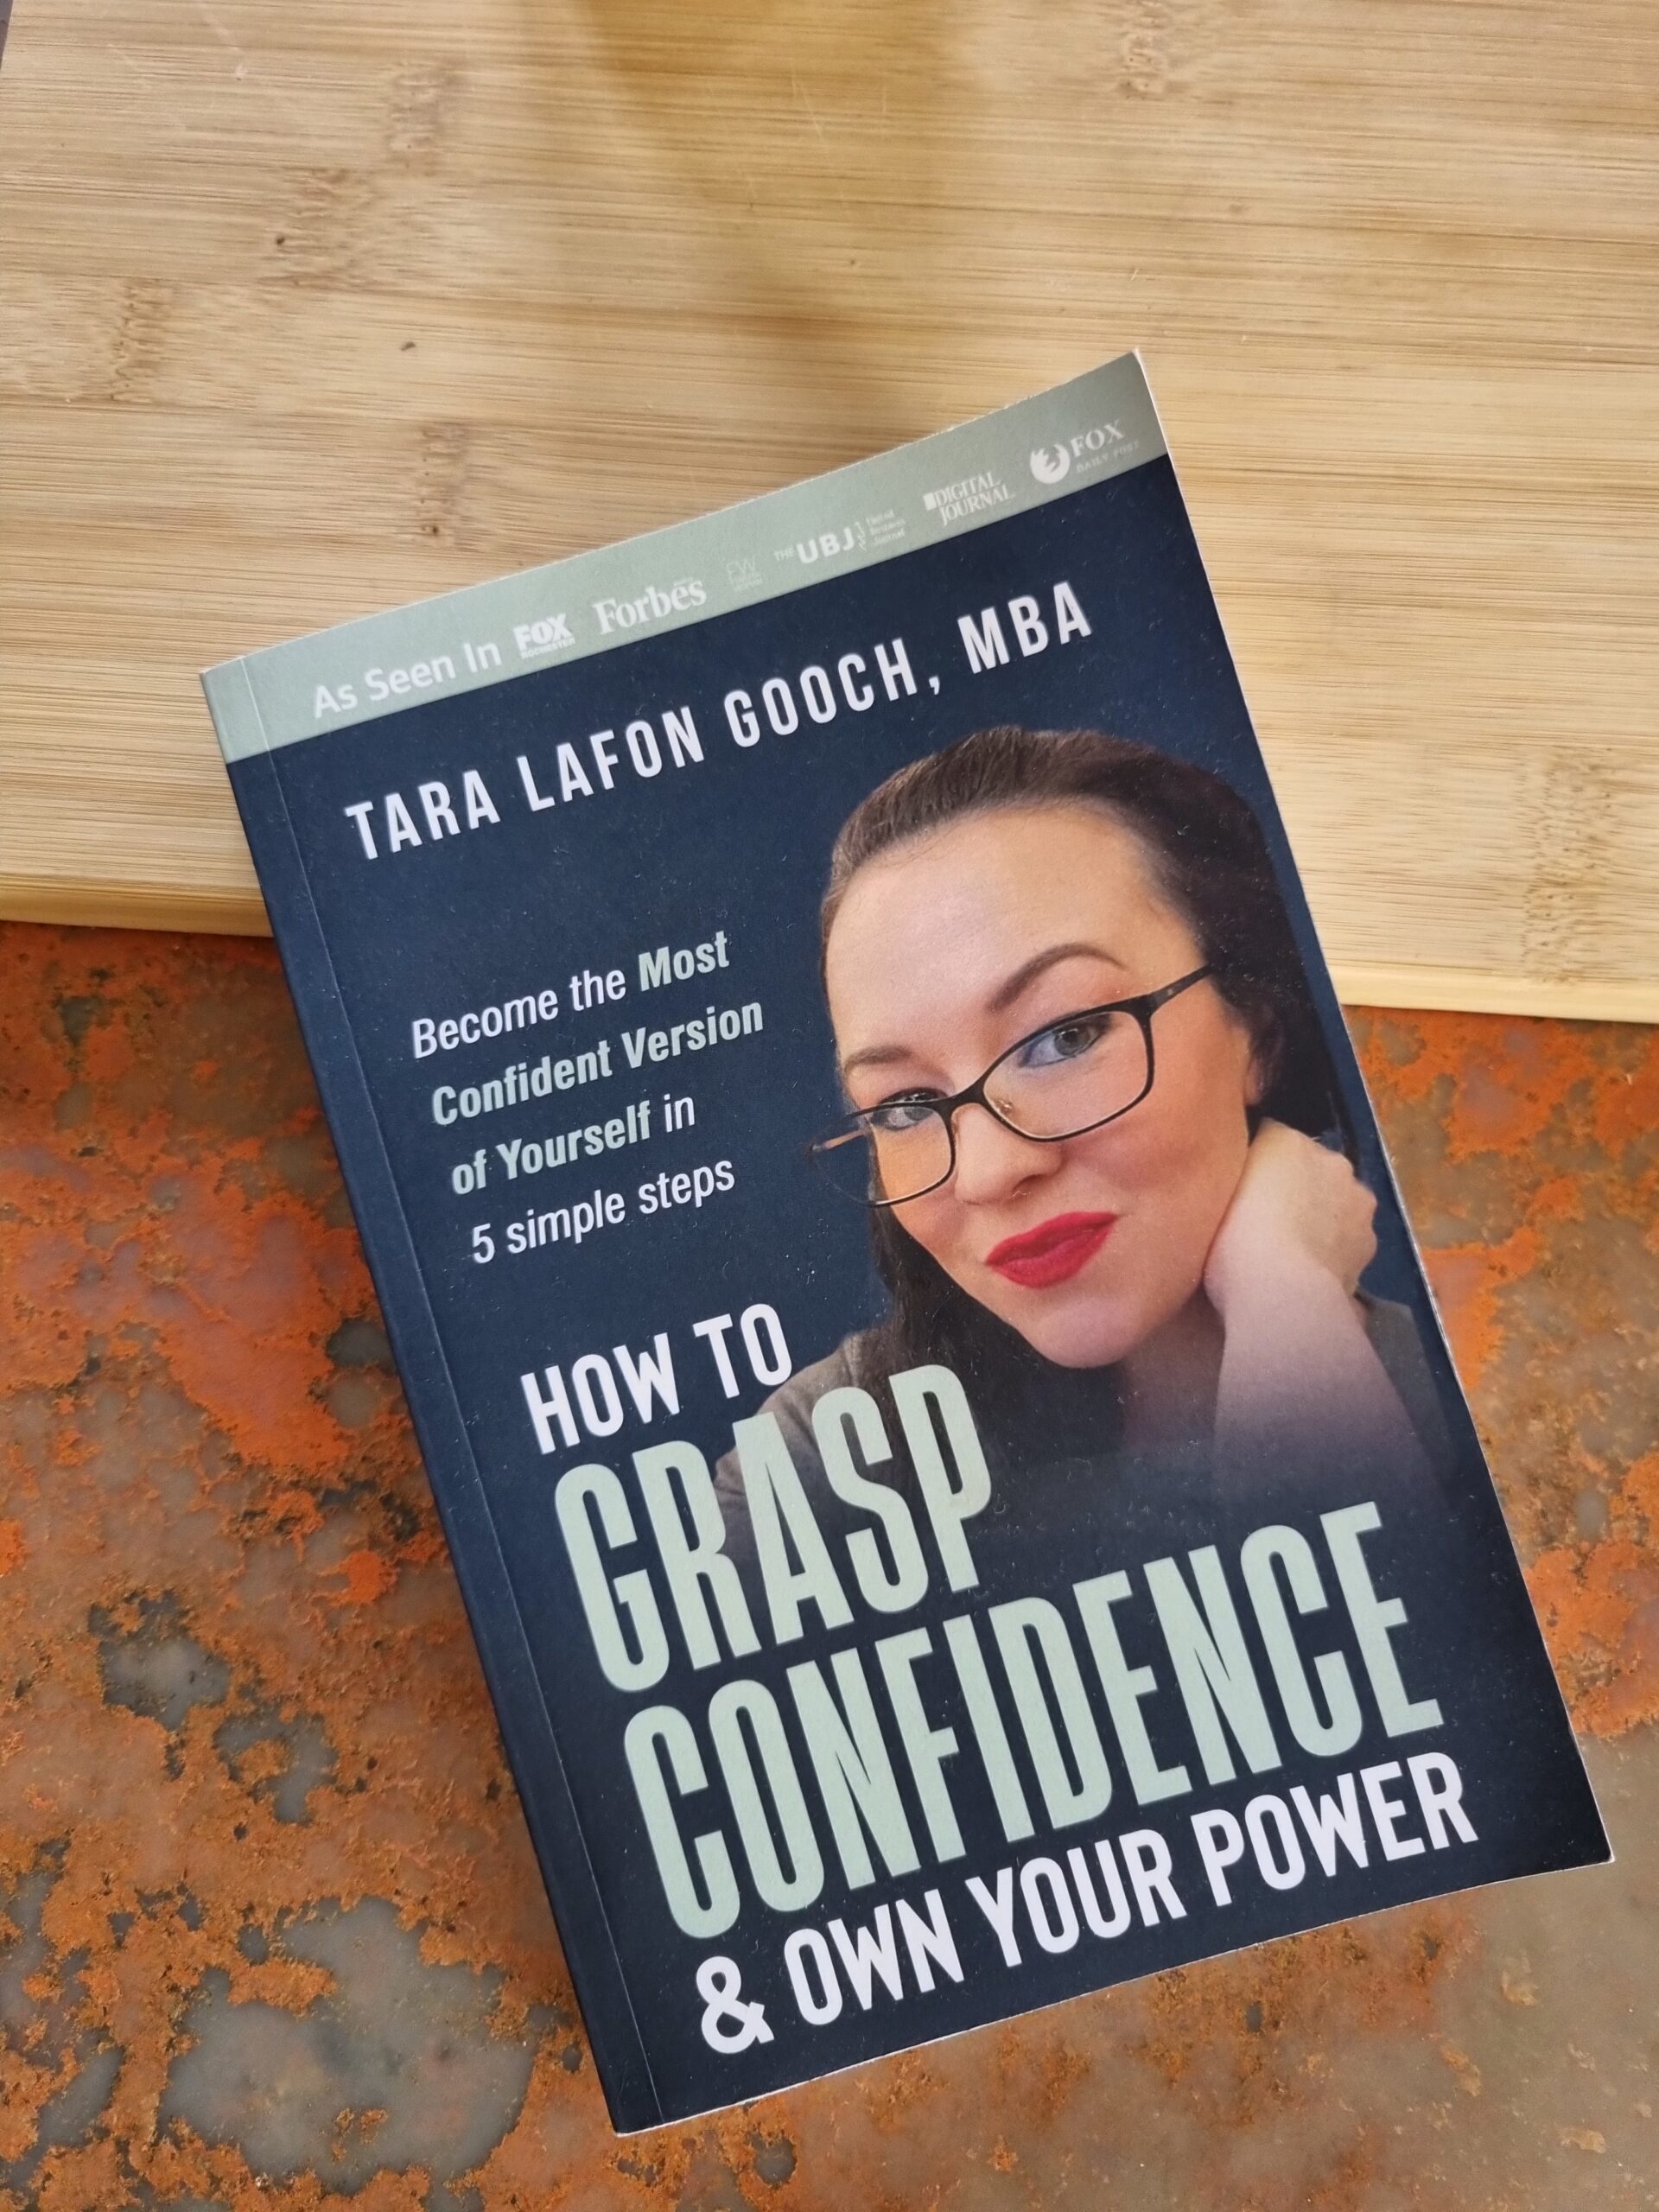 Grasping Confidence Owning Your Power